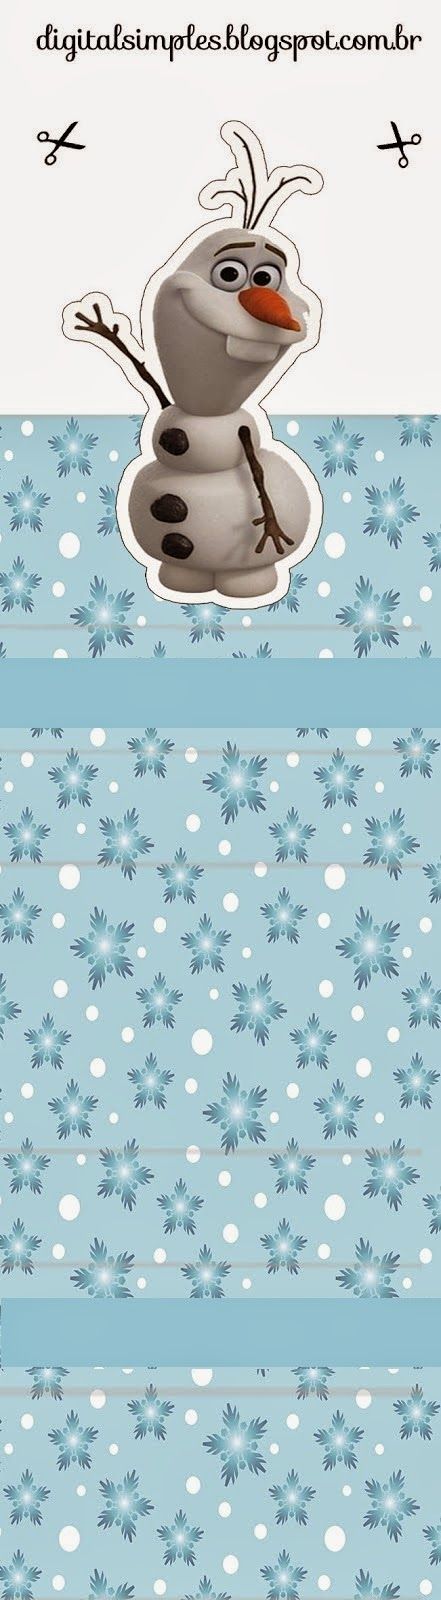 Frozen Free Printable Original Nuggets or Gum Wrappers